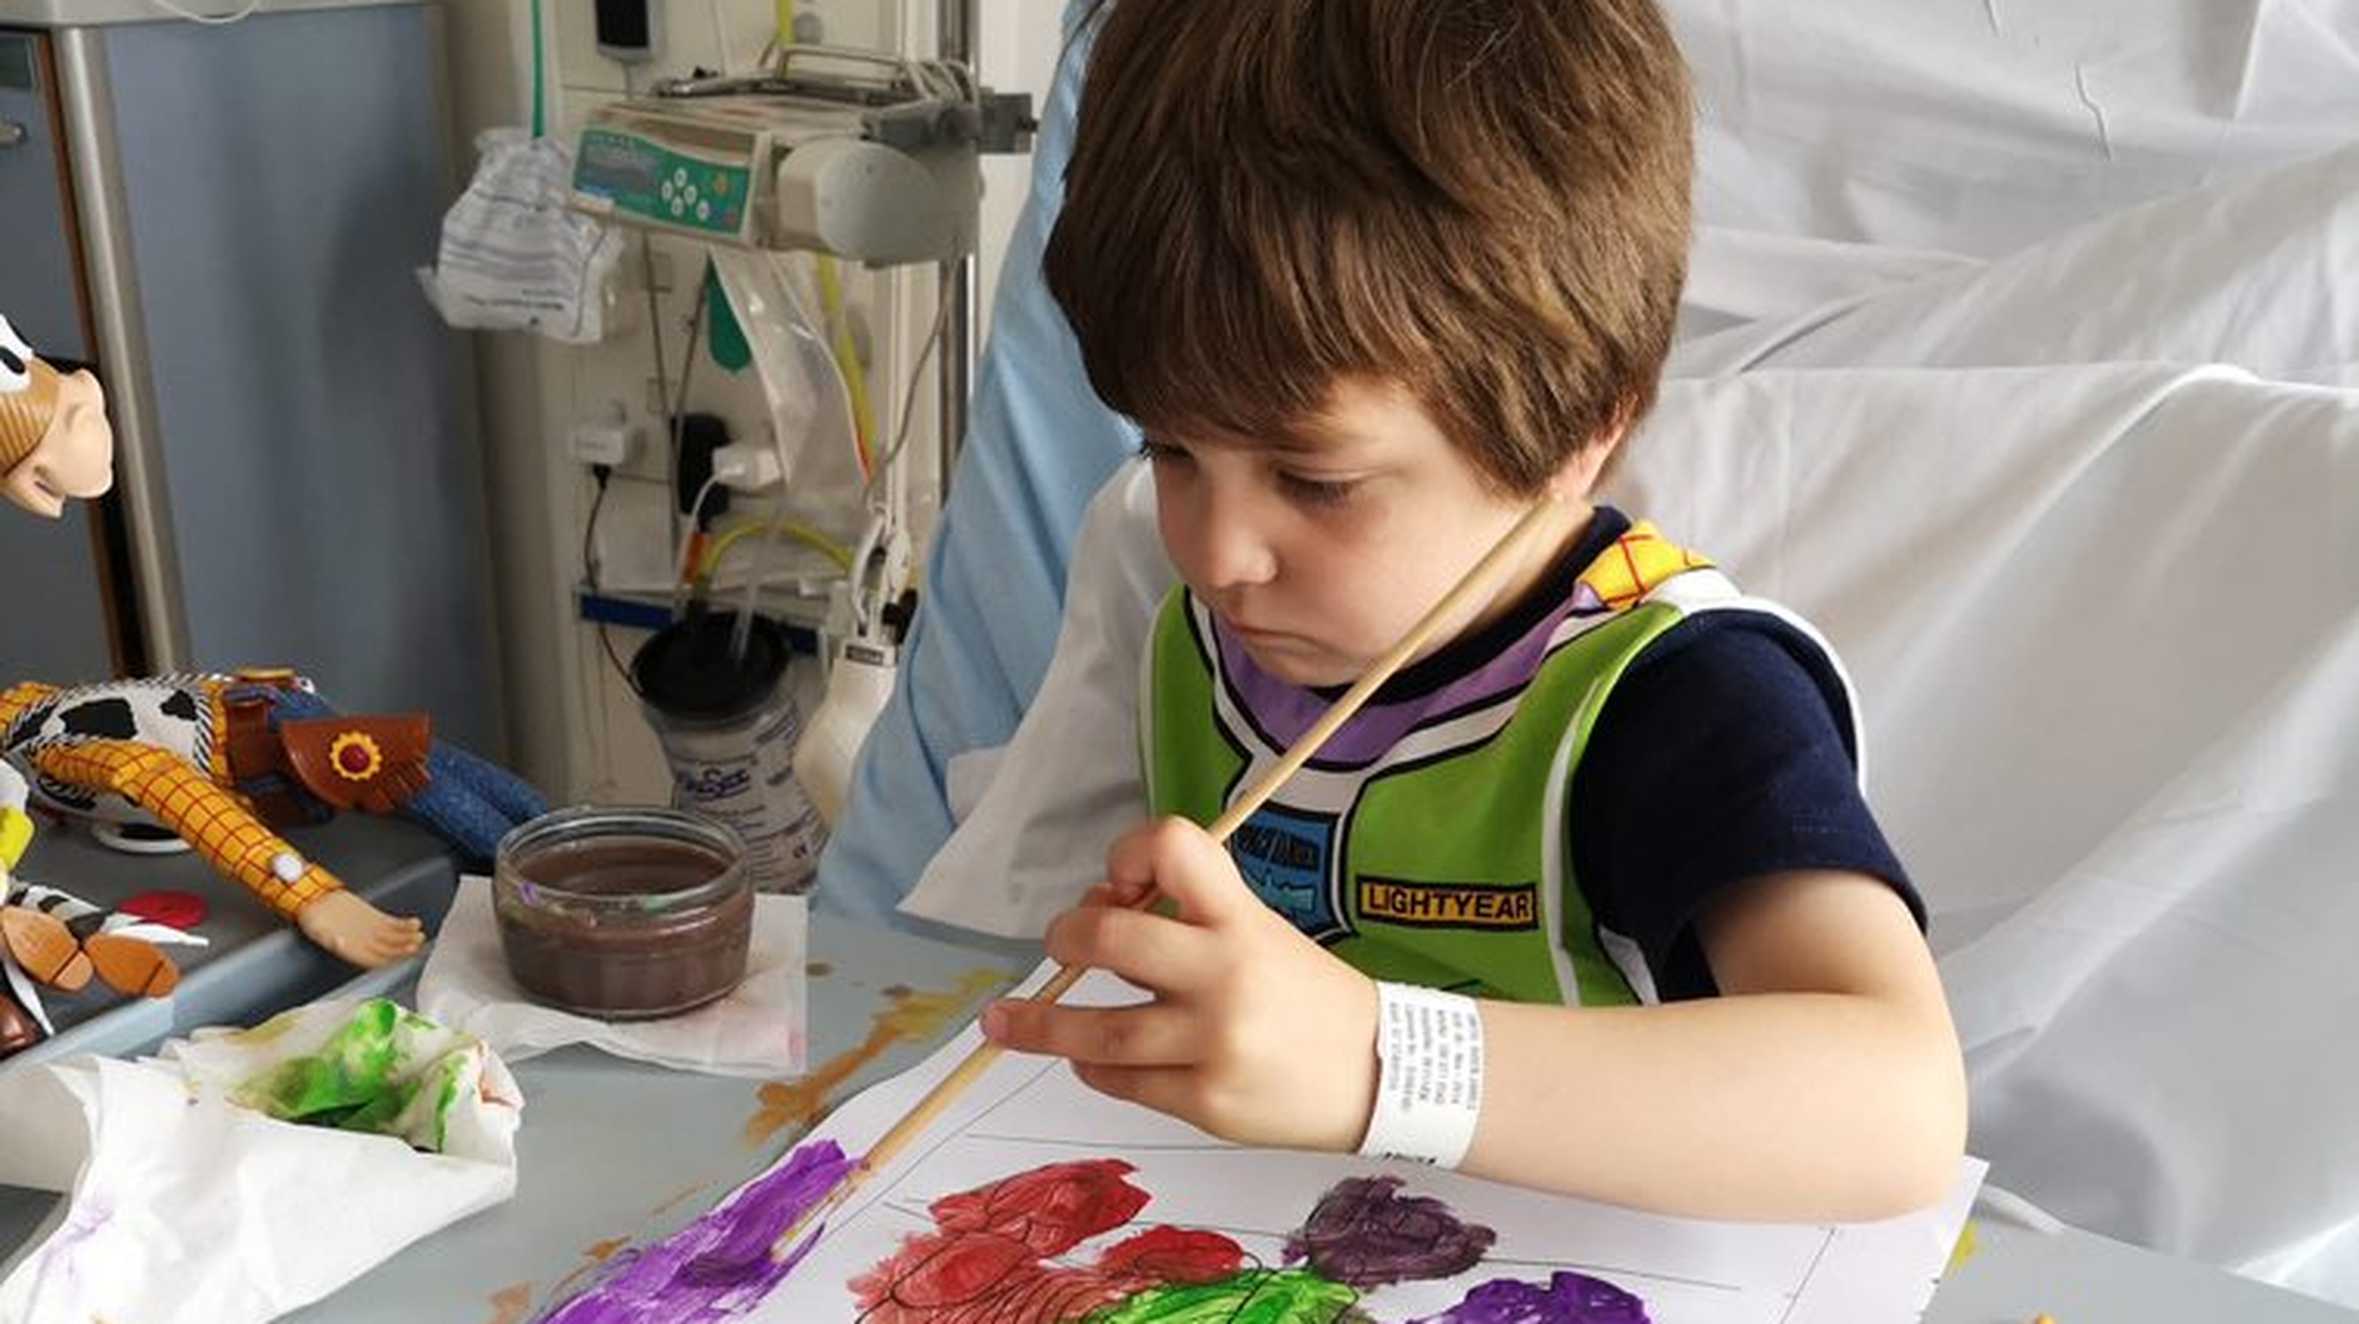 Wish child, Aiden painting while in hospital.